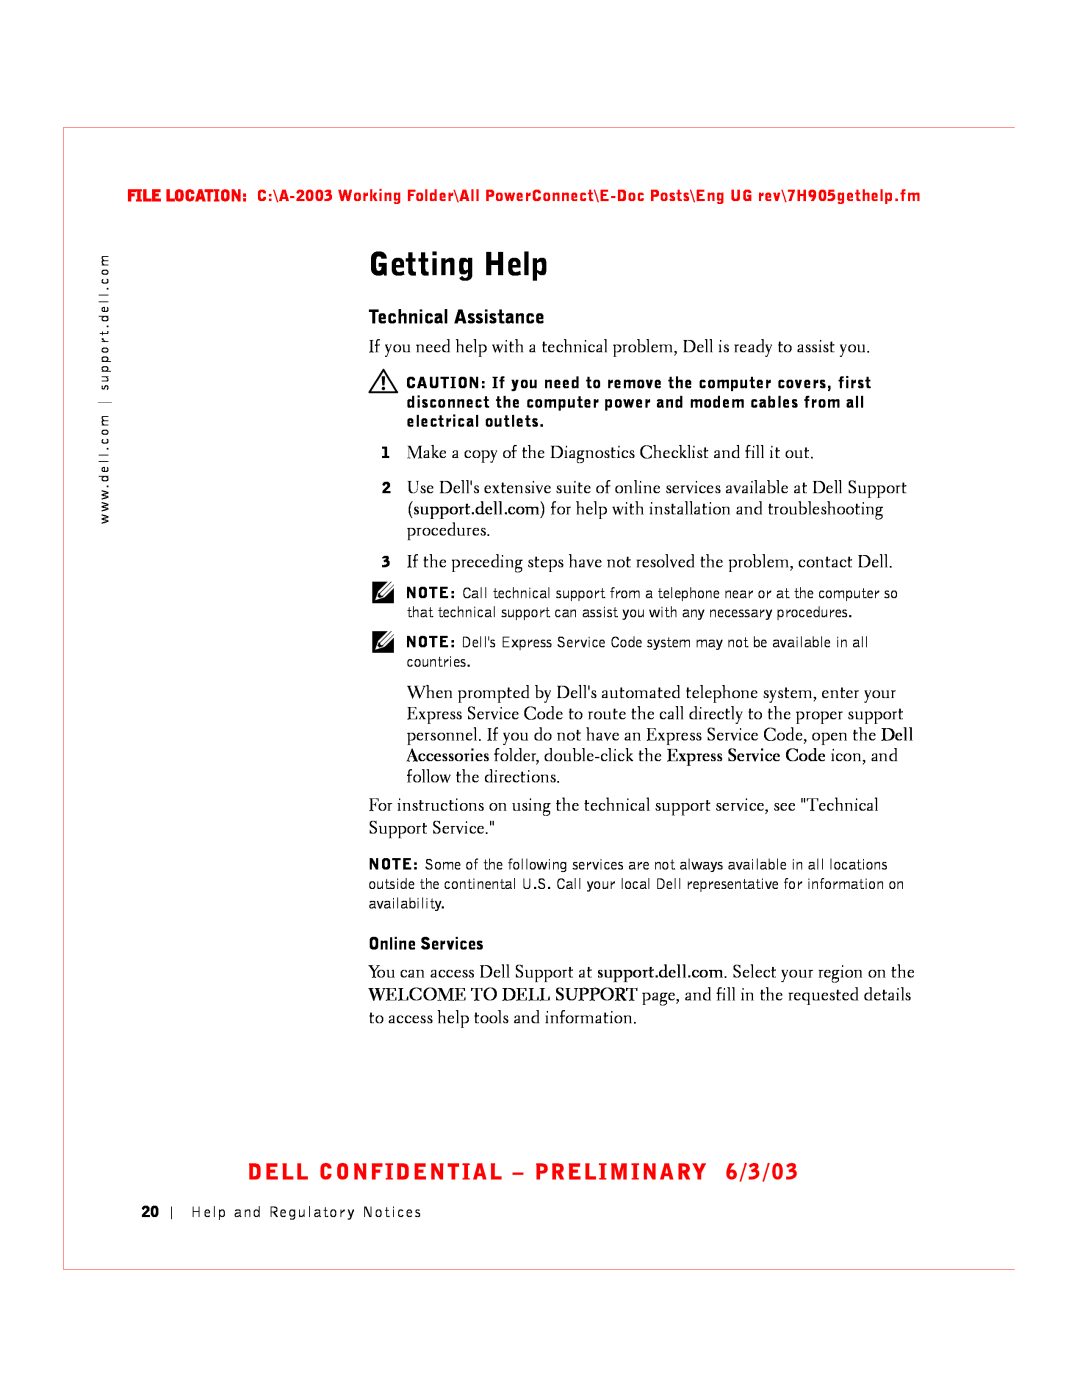 Dell 2016, 2024 manual Getting Help, Technical Assistance, DELL CONFIDENTIAL - PRELIMINARY 6/3/03 